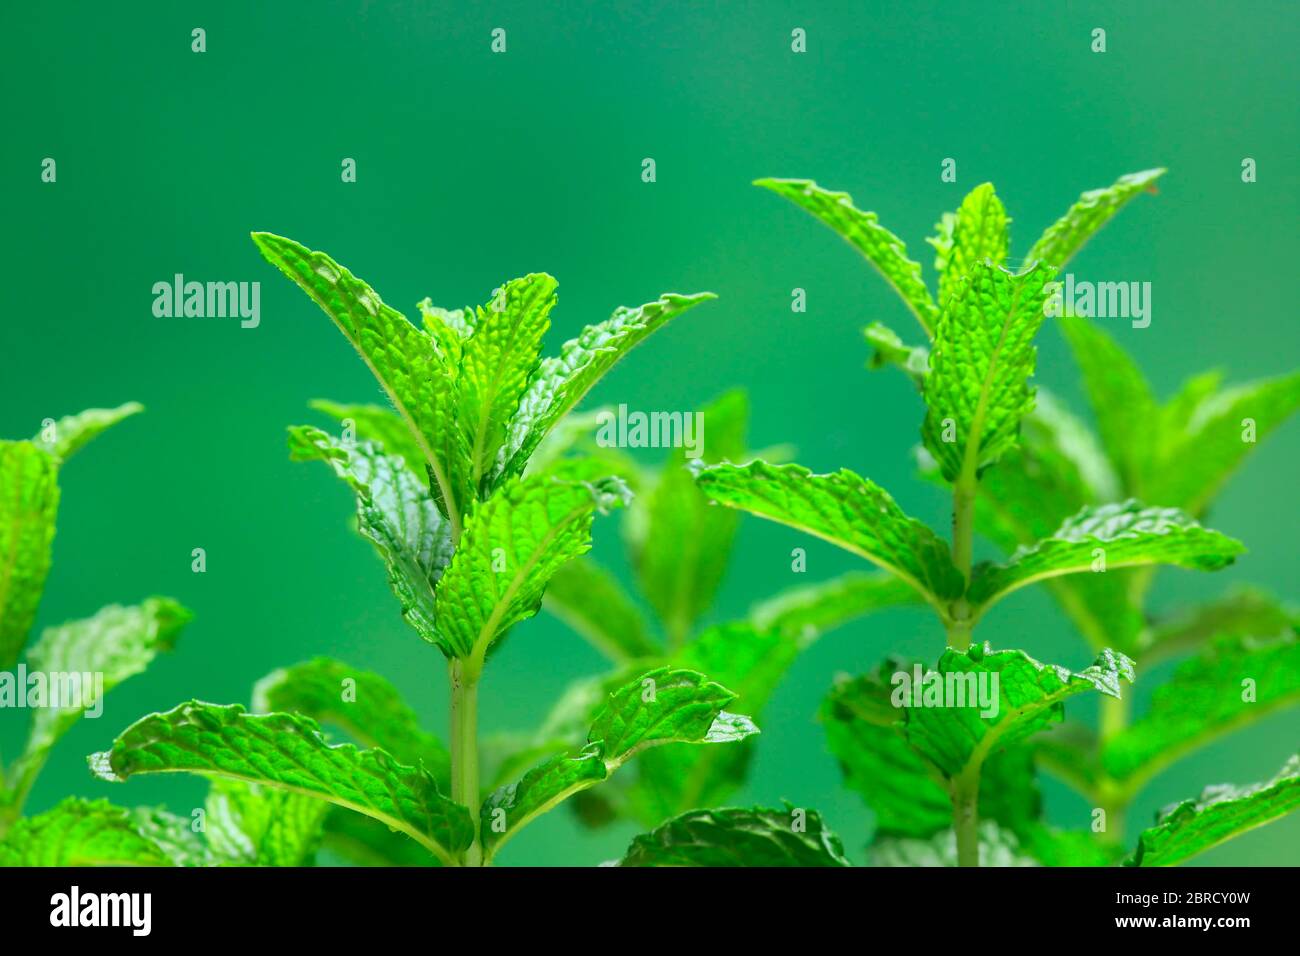 Curled mint (Mentha spicata var. Crispa), leaves, herbs, spices, Germany Stock Photo